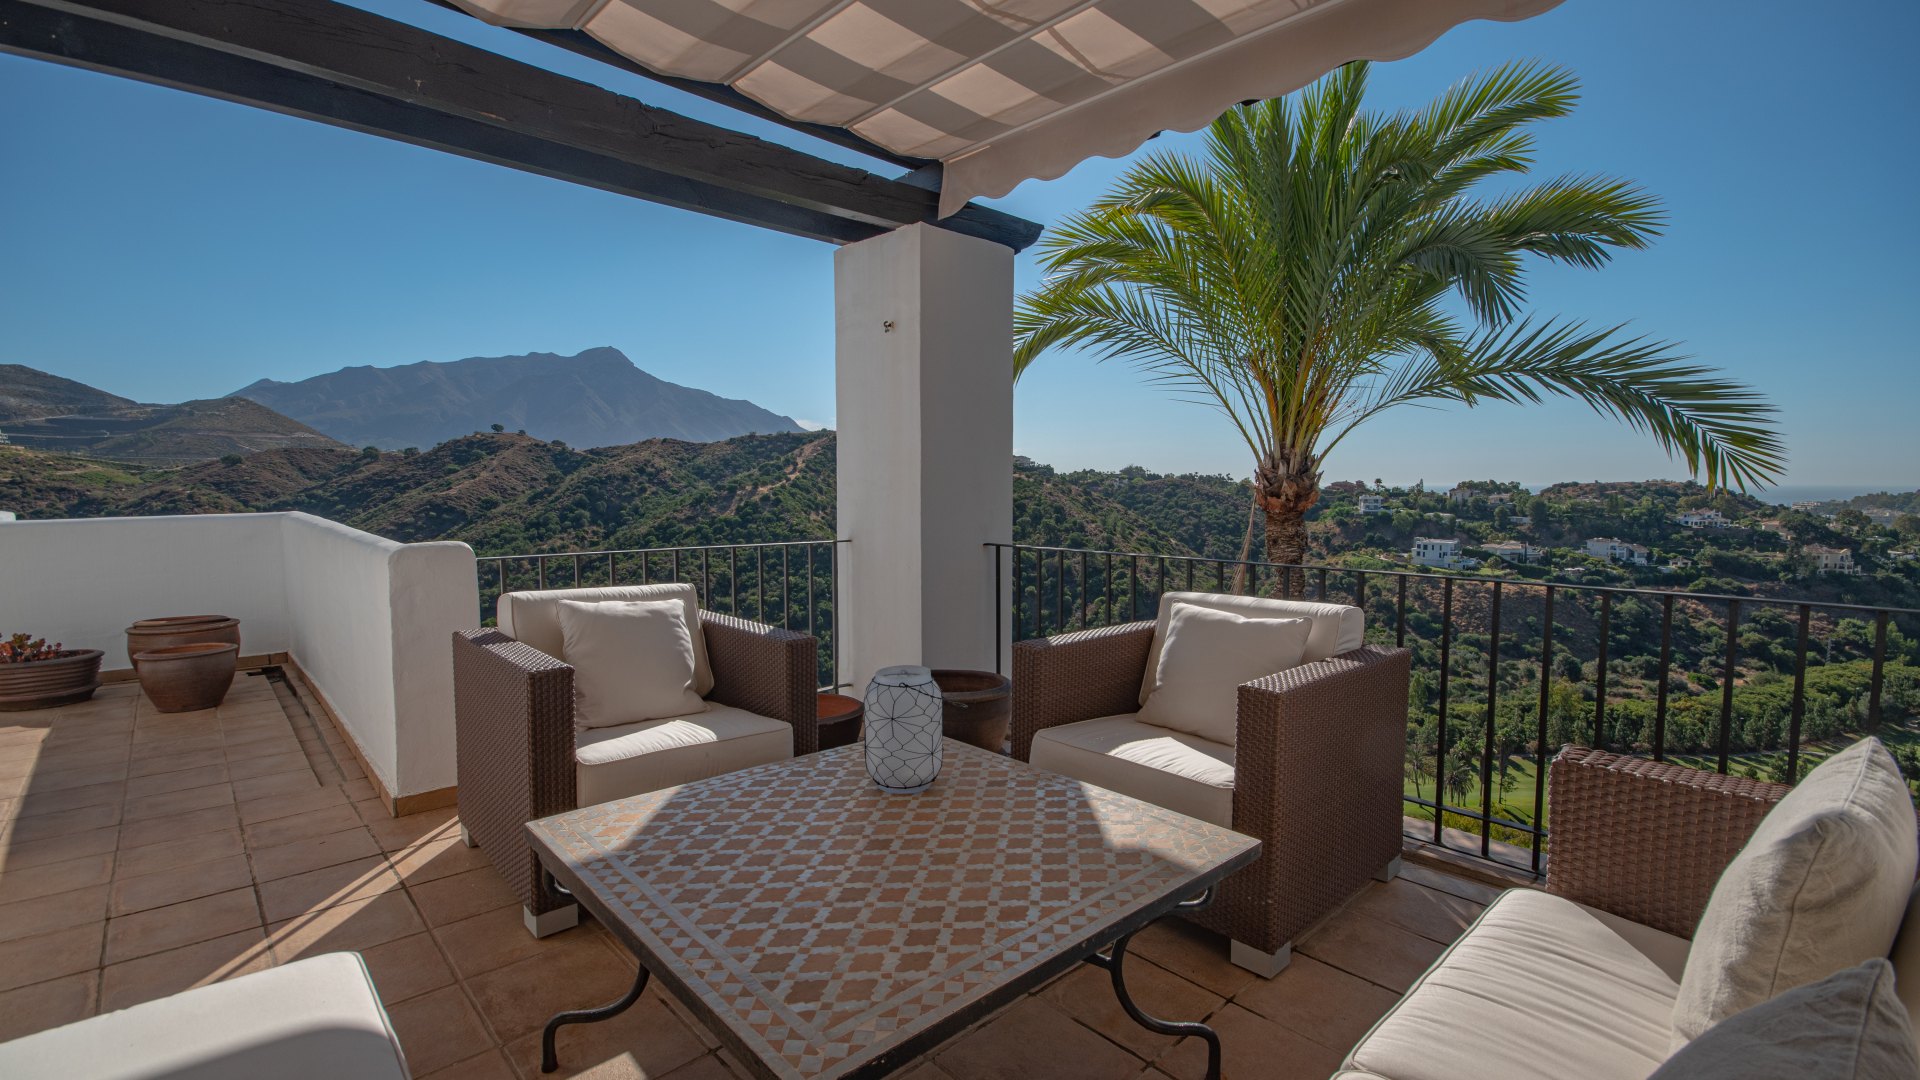 Luxury vacation home with 3 bedrooms in the contemporary urbanization of Los Altos de la Quinta, Benahavís, with panoramic views of the mountains, the golf courses and the sea, very close to golf courses and a few minutes by car from Puerto Banús